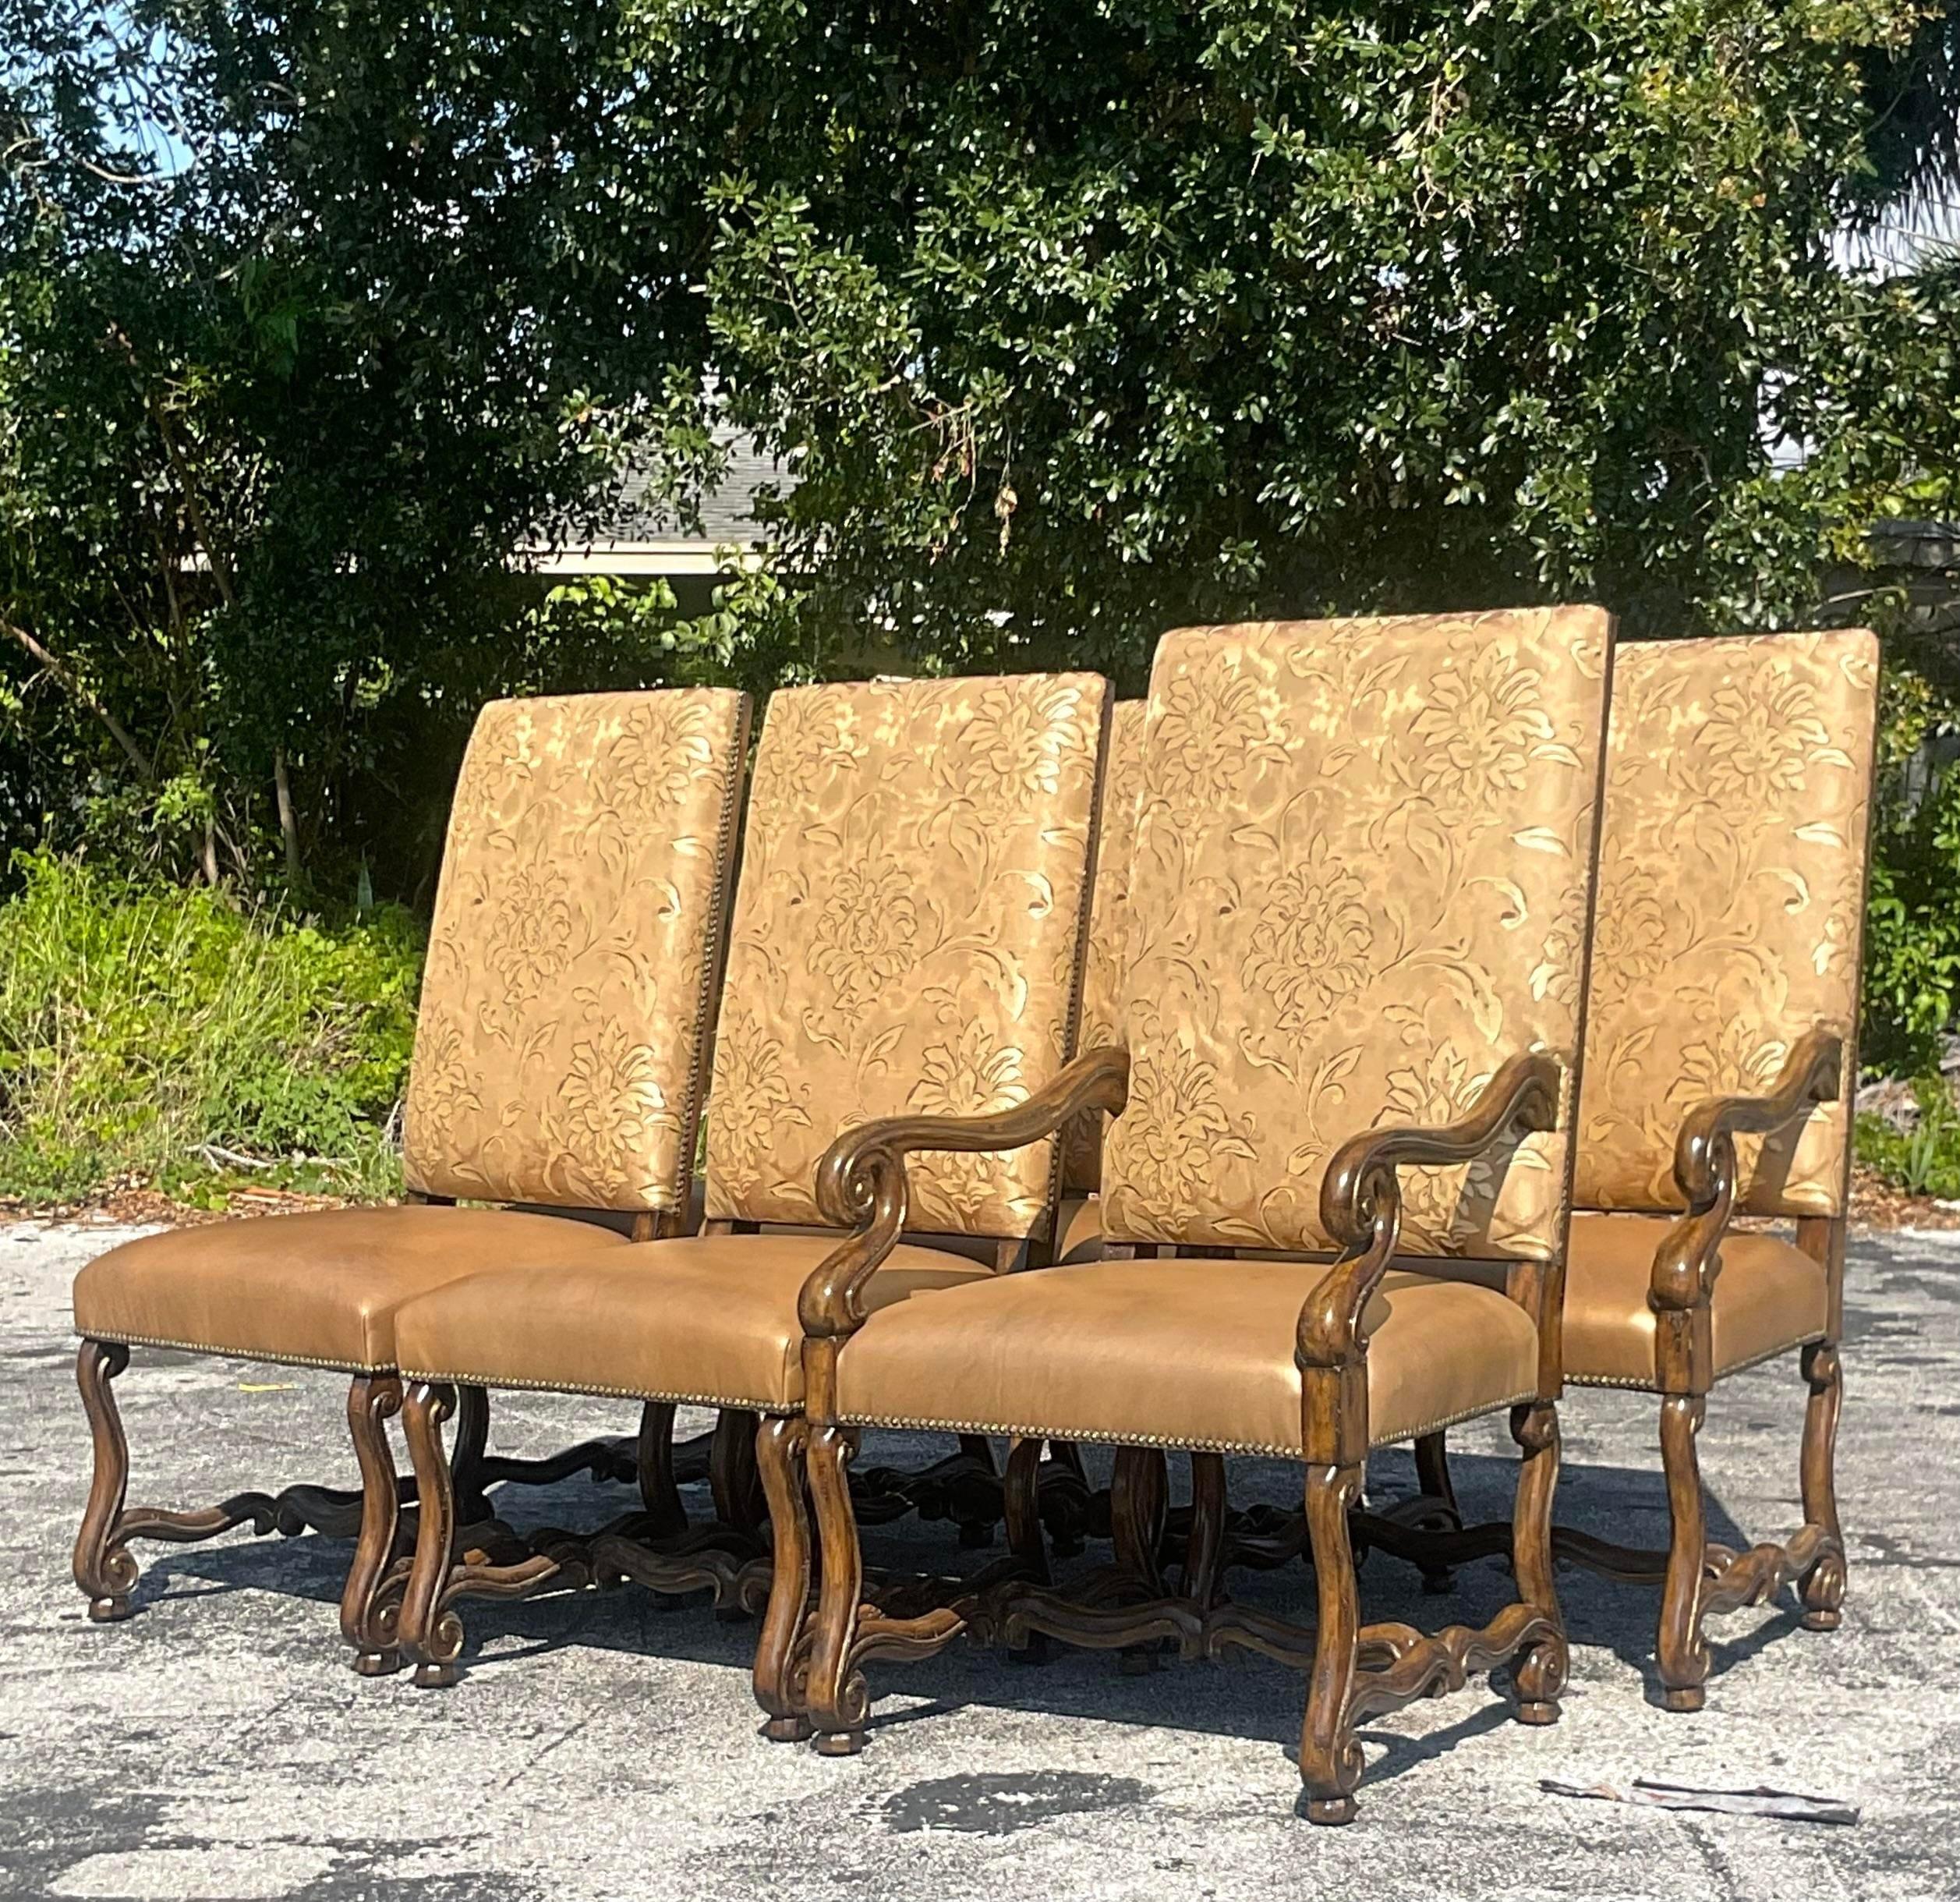 A fabulous vintage Boho set of six dining chairs. Made by the legendary Marge Carson group. Beautiful high back chairs with a lurex brocade and metallic leather seats. Acquired from a Palm Beach estate.

Arm chair width 23.75.